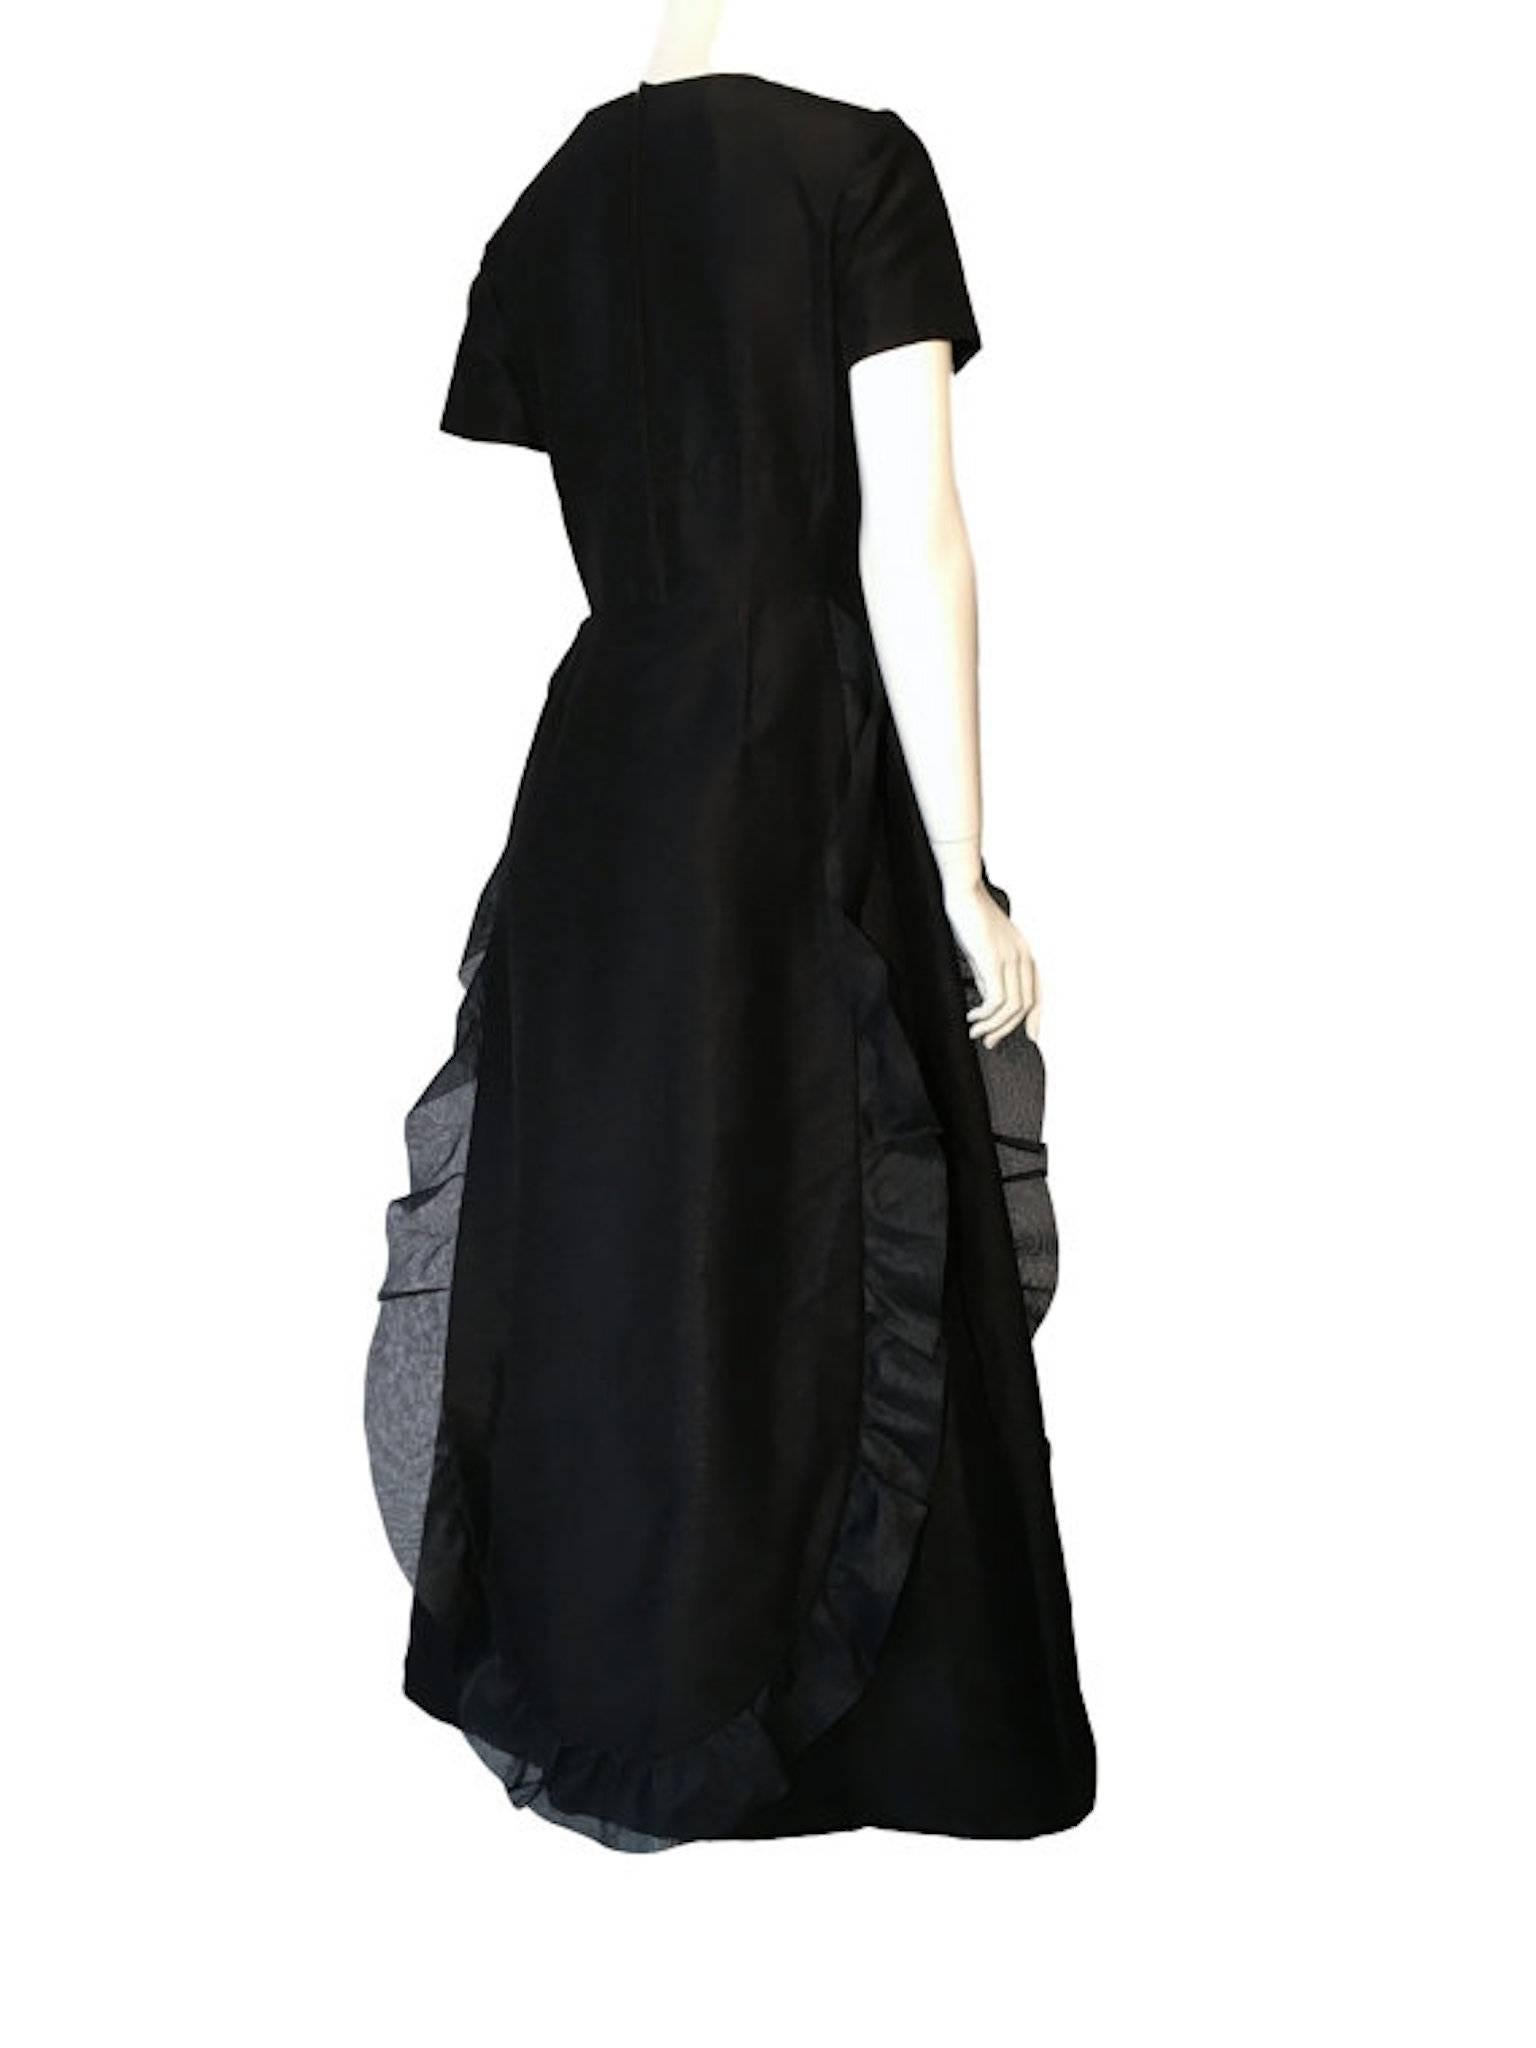 Black woven silk unlabelled black evening dress, 1960s era. Made at couture standard. Has front and back panel with ruffle trim. Metal zip and popper entry from the back. 

Size UK 8 measures 16 inches across bust, 13 inches across waist and 56